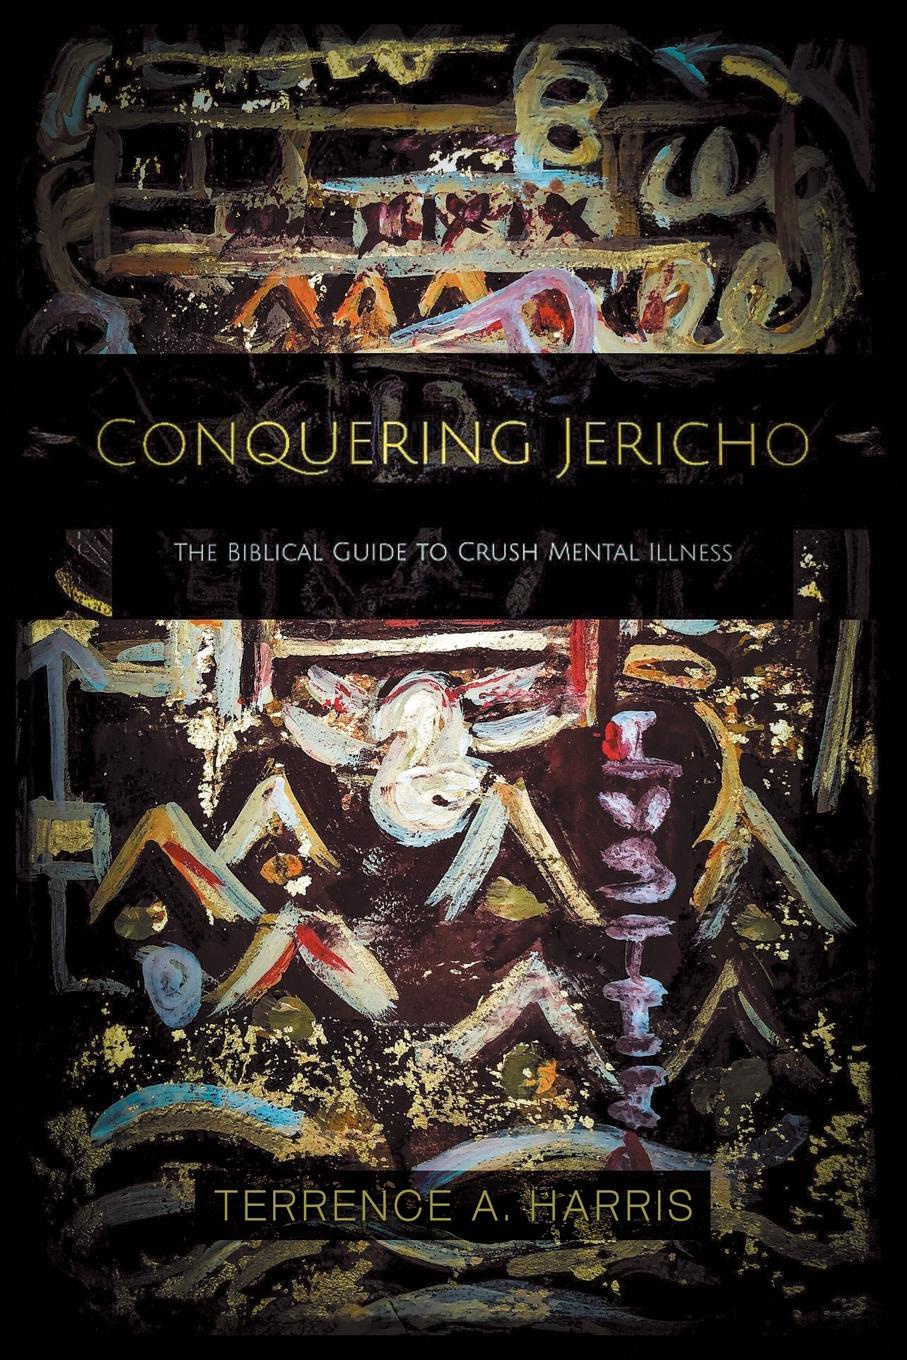 Conquering Jericho. The Biblical Guide to Crush Mental Illness